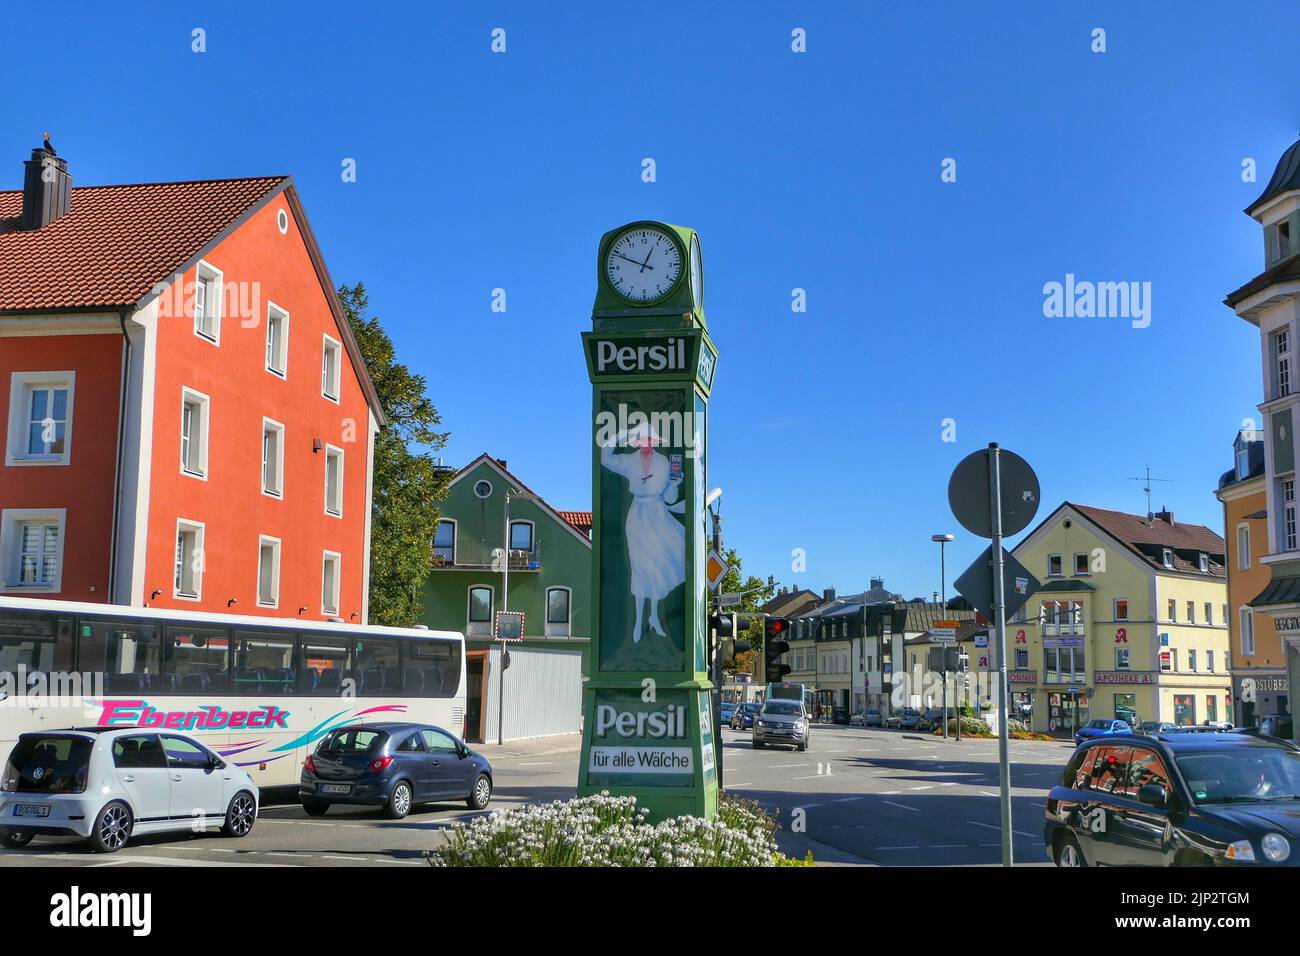 Picture shows Street and Cityphotography of Straubing in Bavaria, Germany Stock Photo